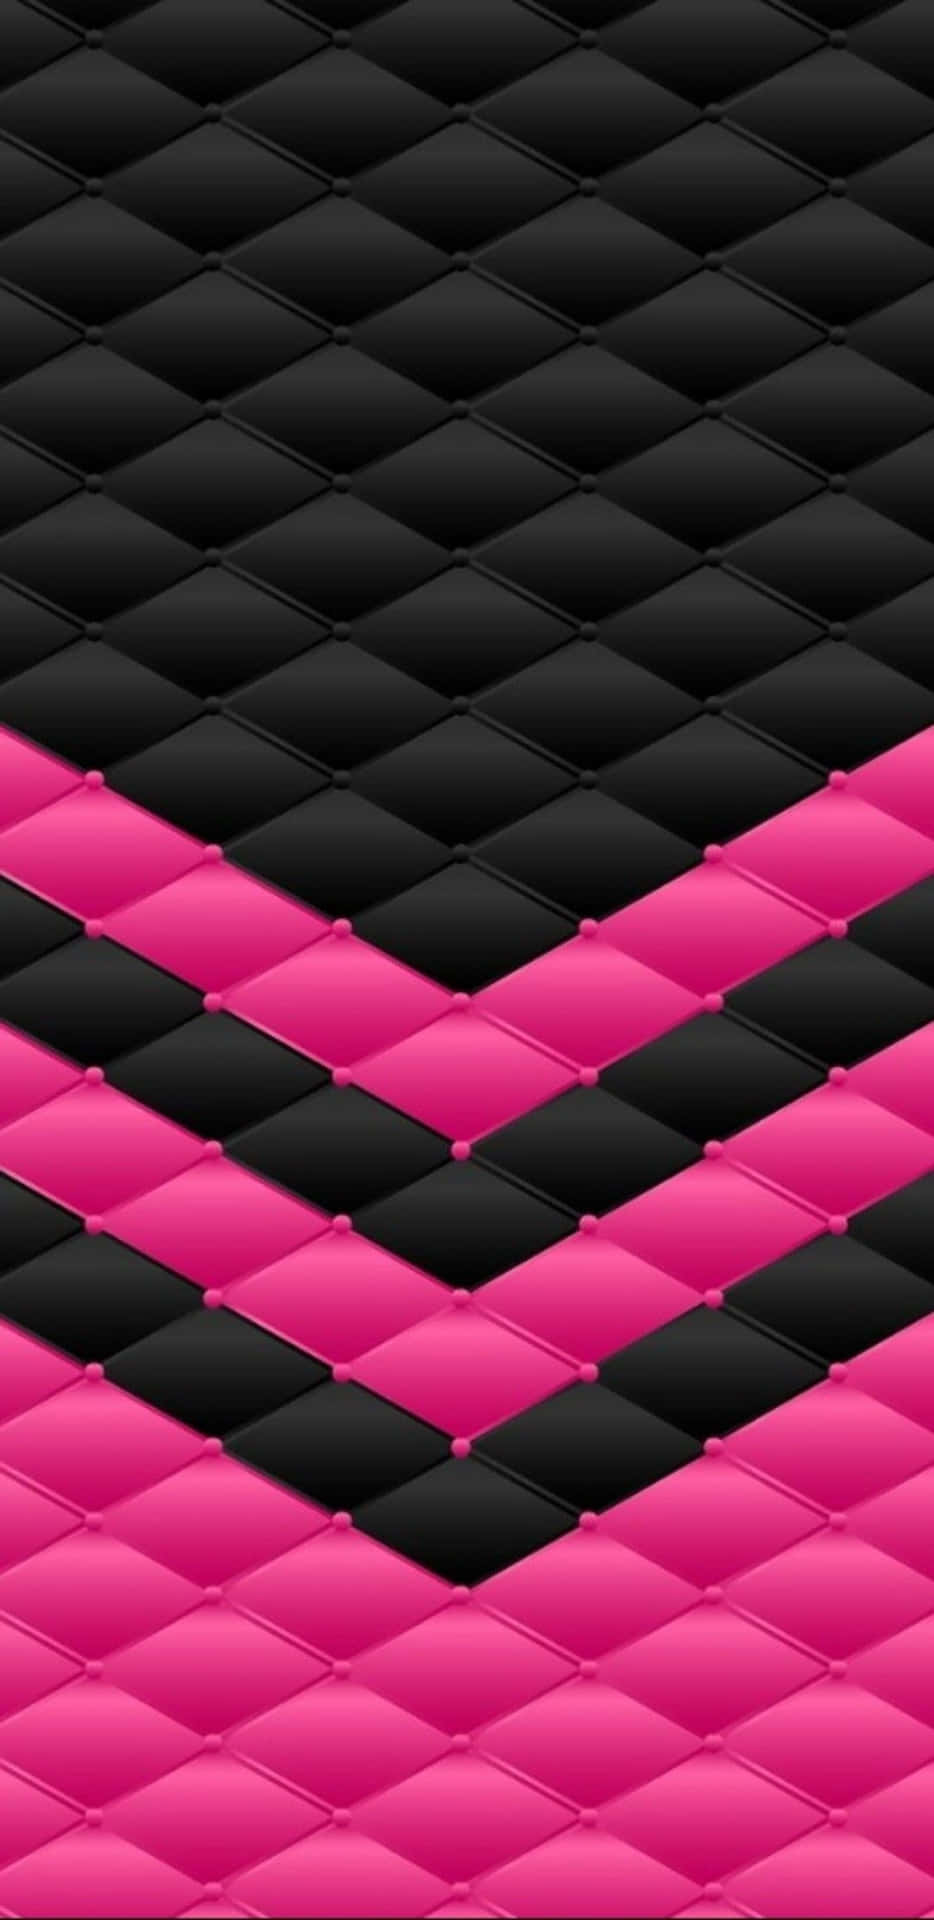 "Stylish Black and Pink iPhone Wallpaper" Wallpaper